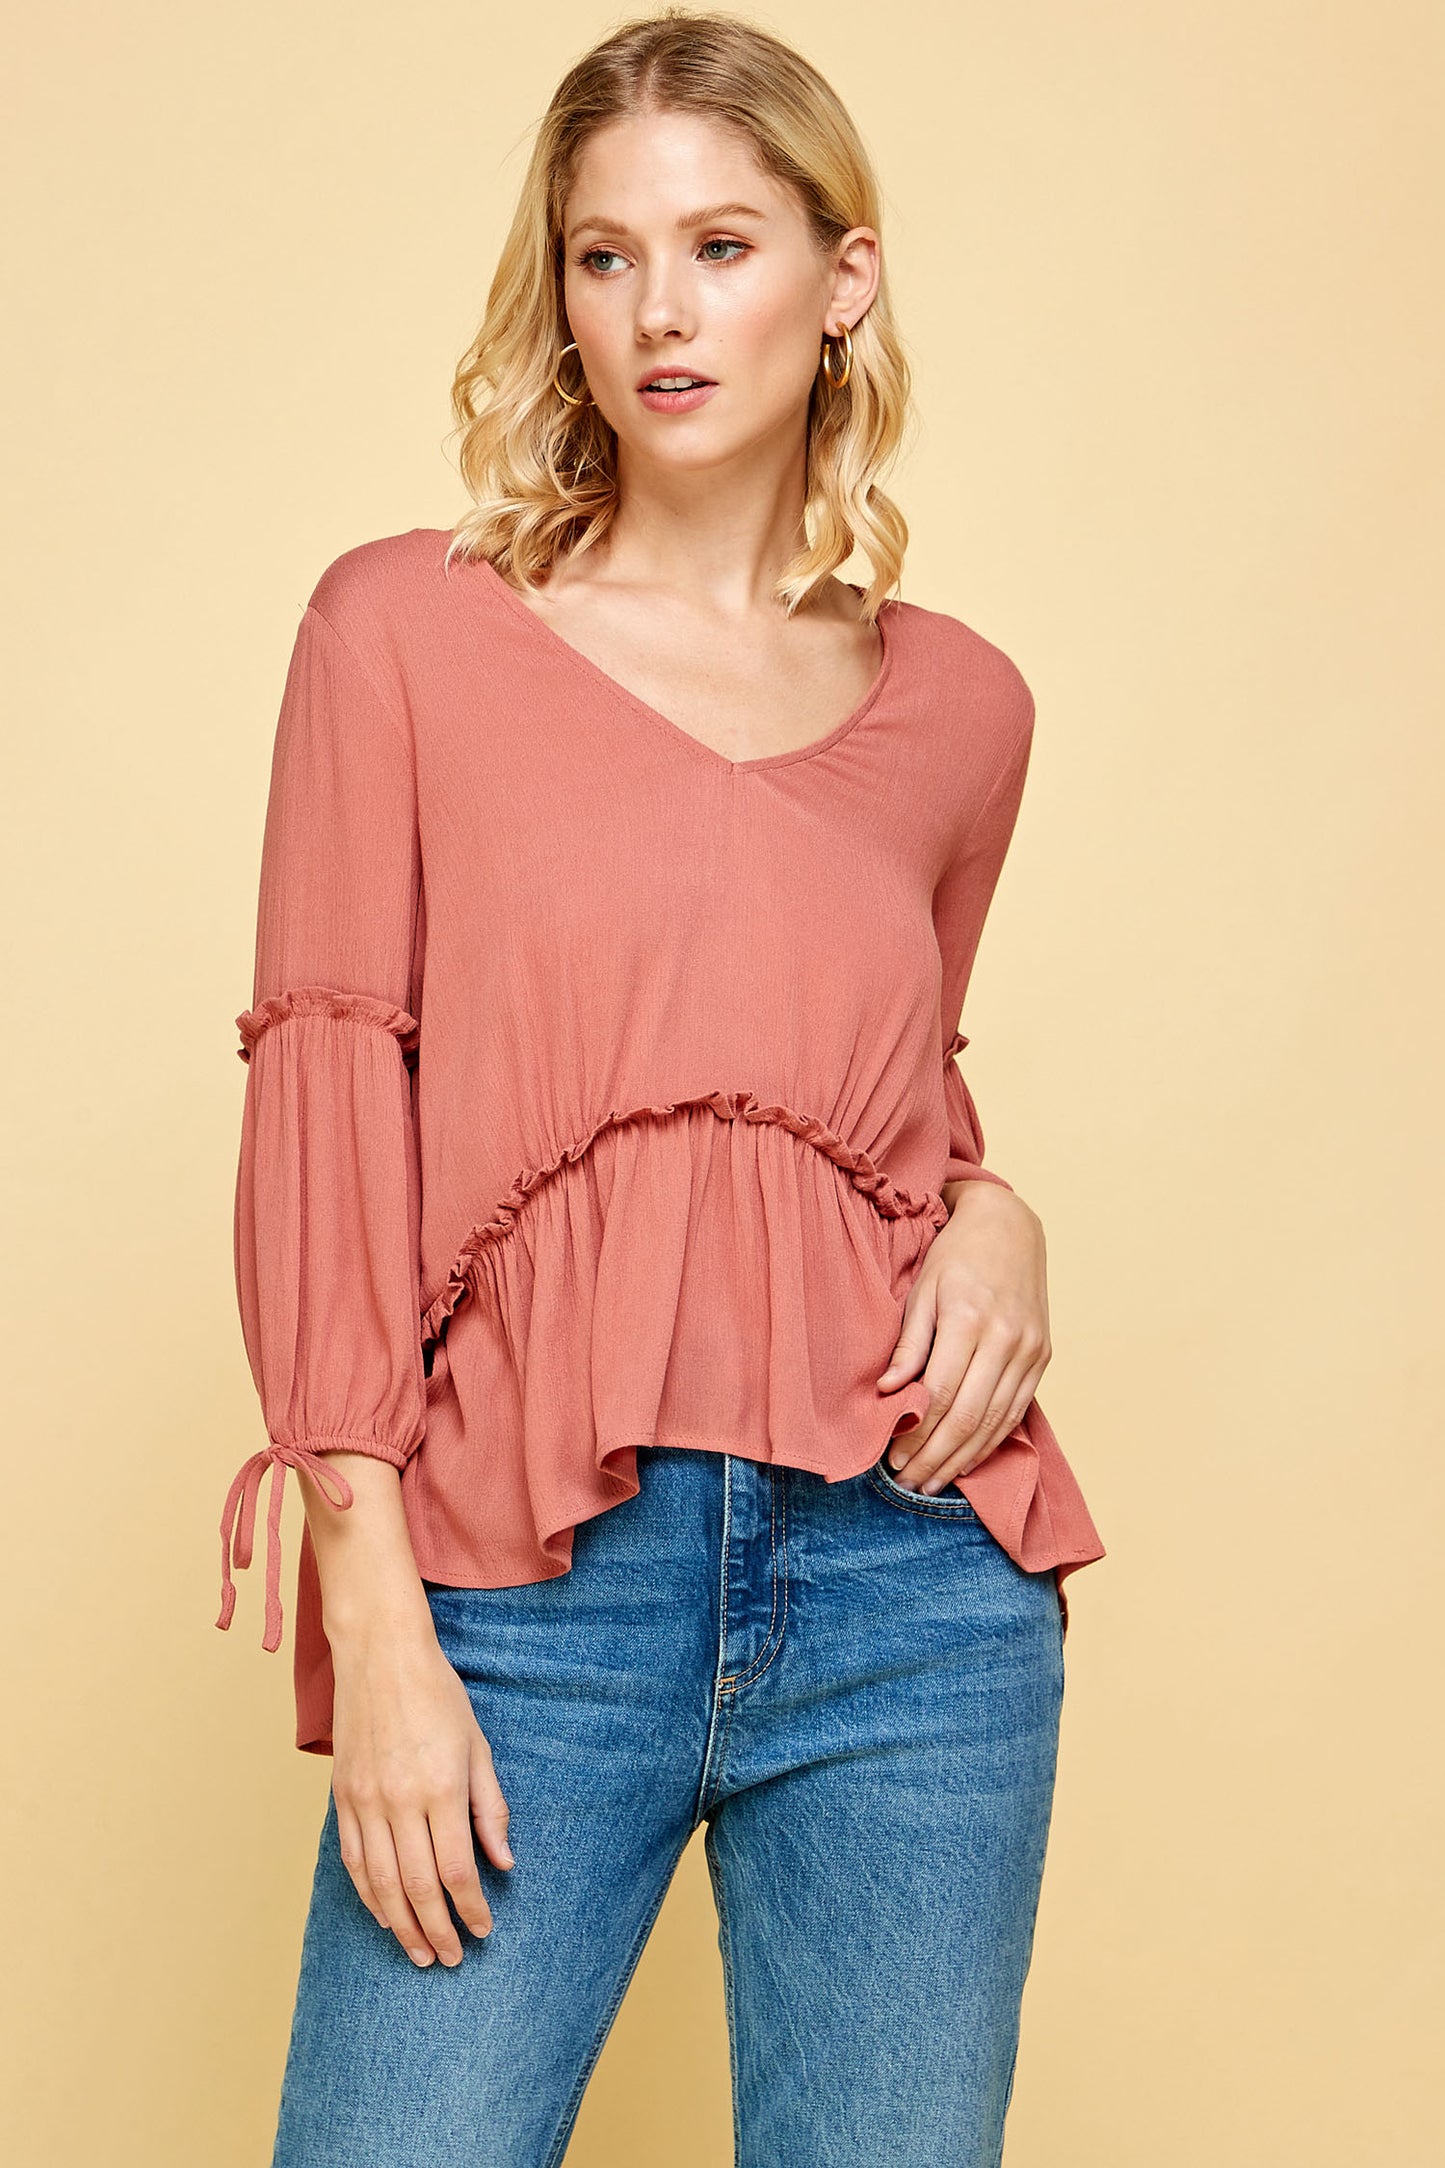 QUARTER SLEEVE TIERED PEASANT TOP IN PINK